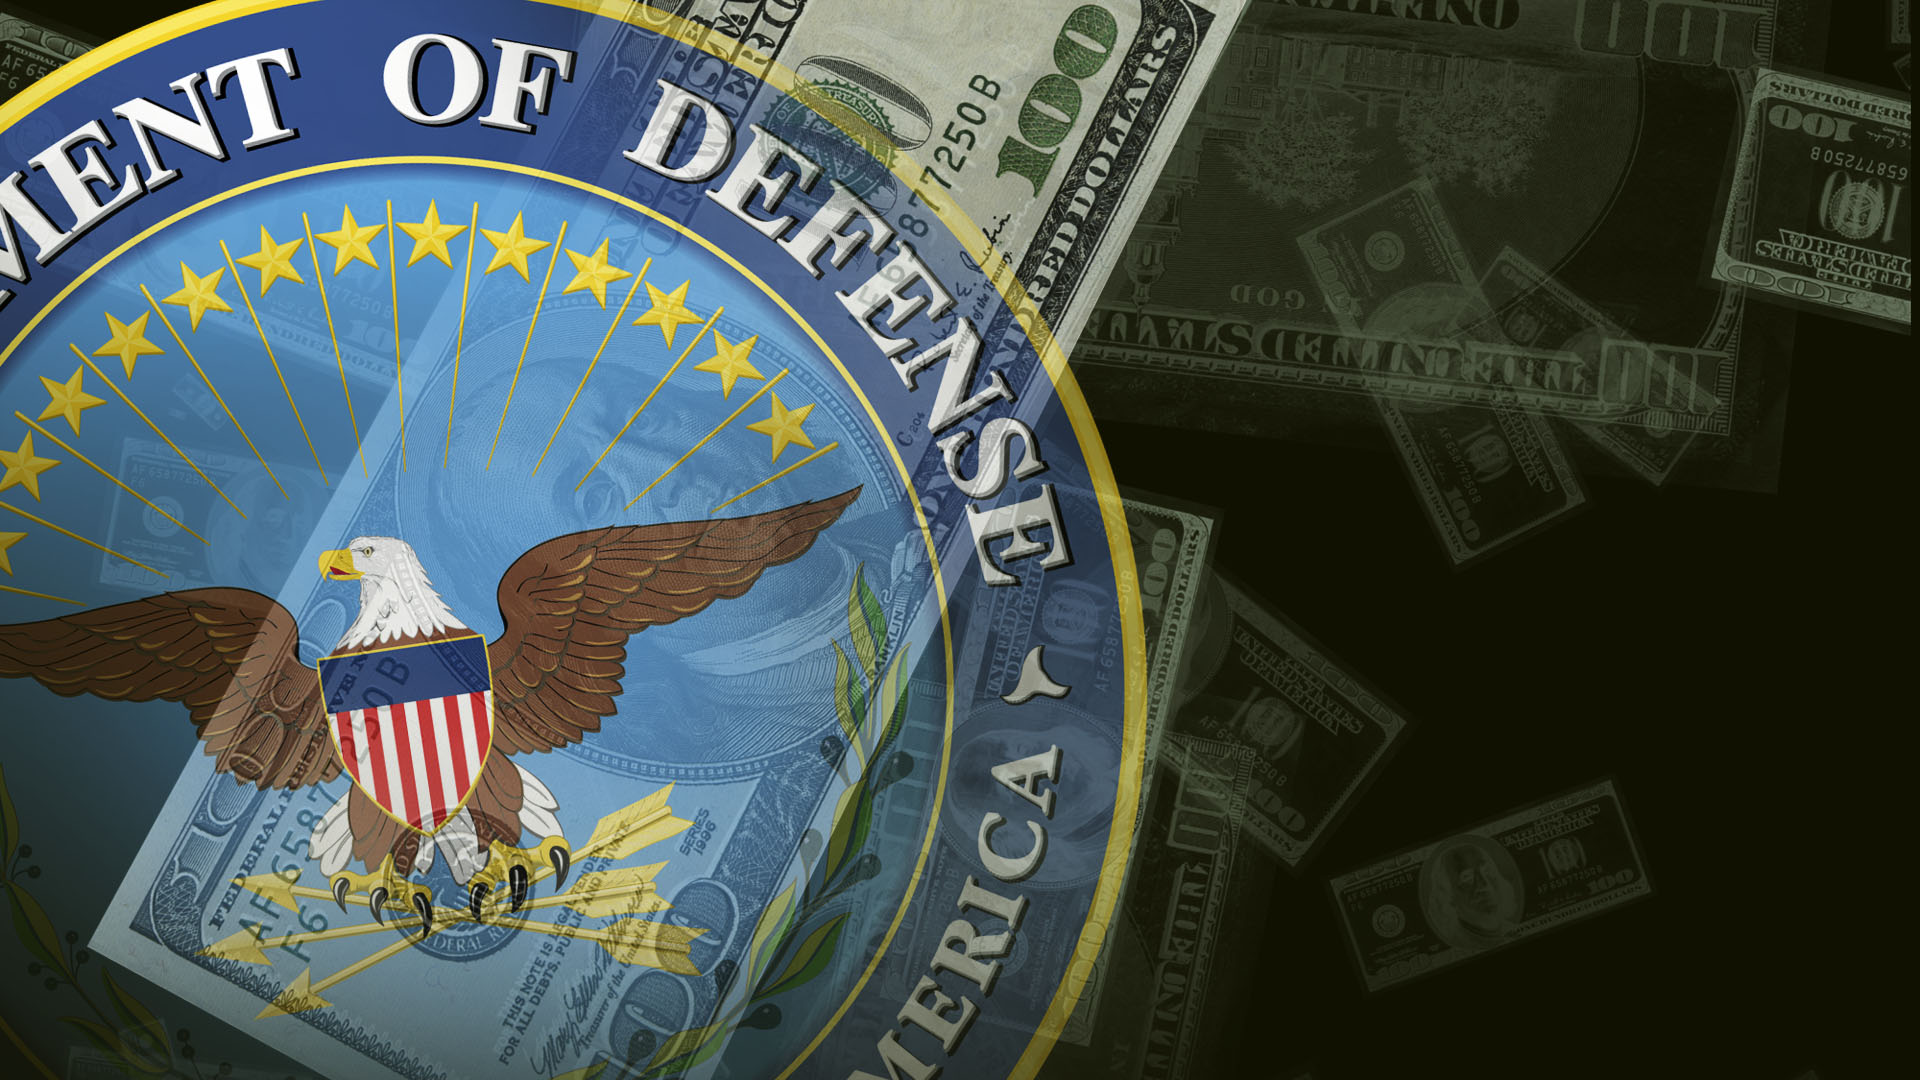 Amid 52 billion plusup, DoD looks to trim spending on service